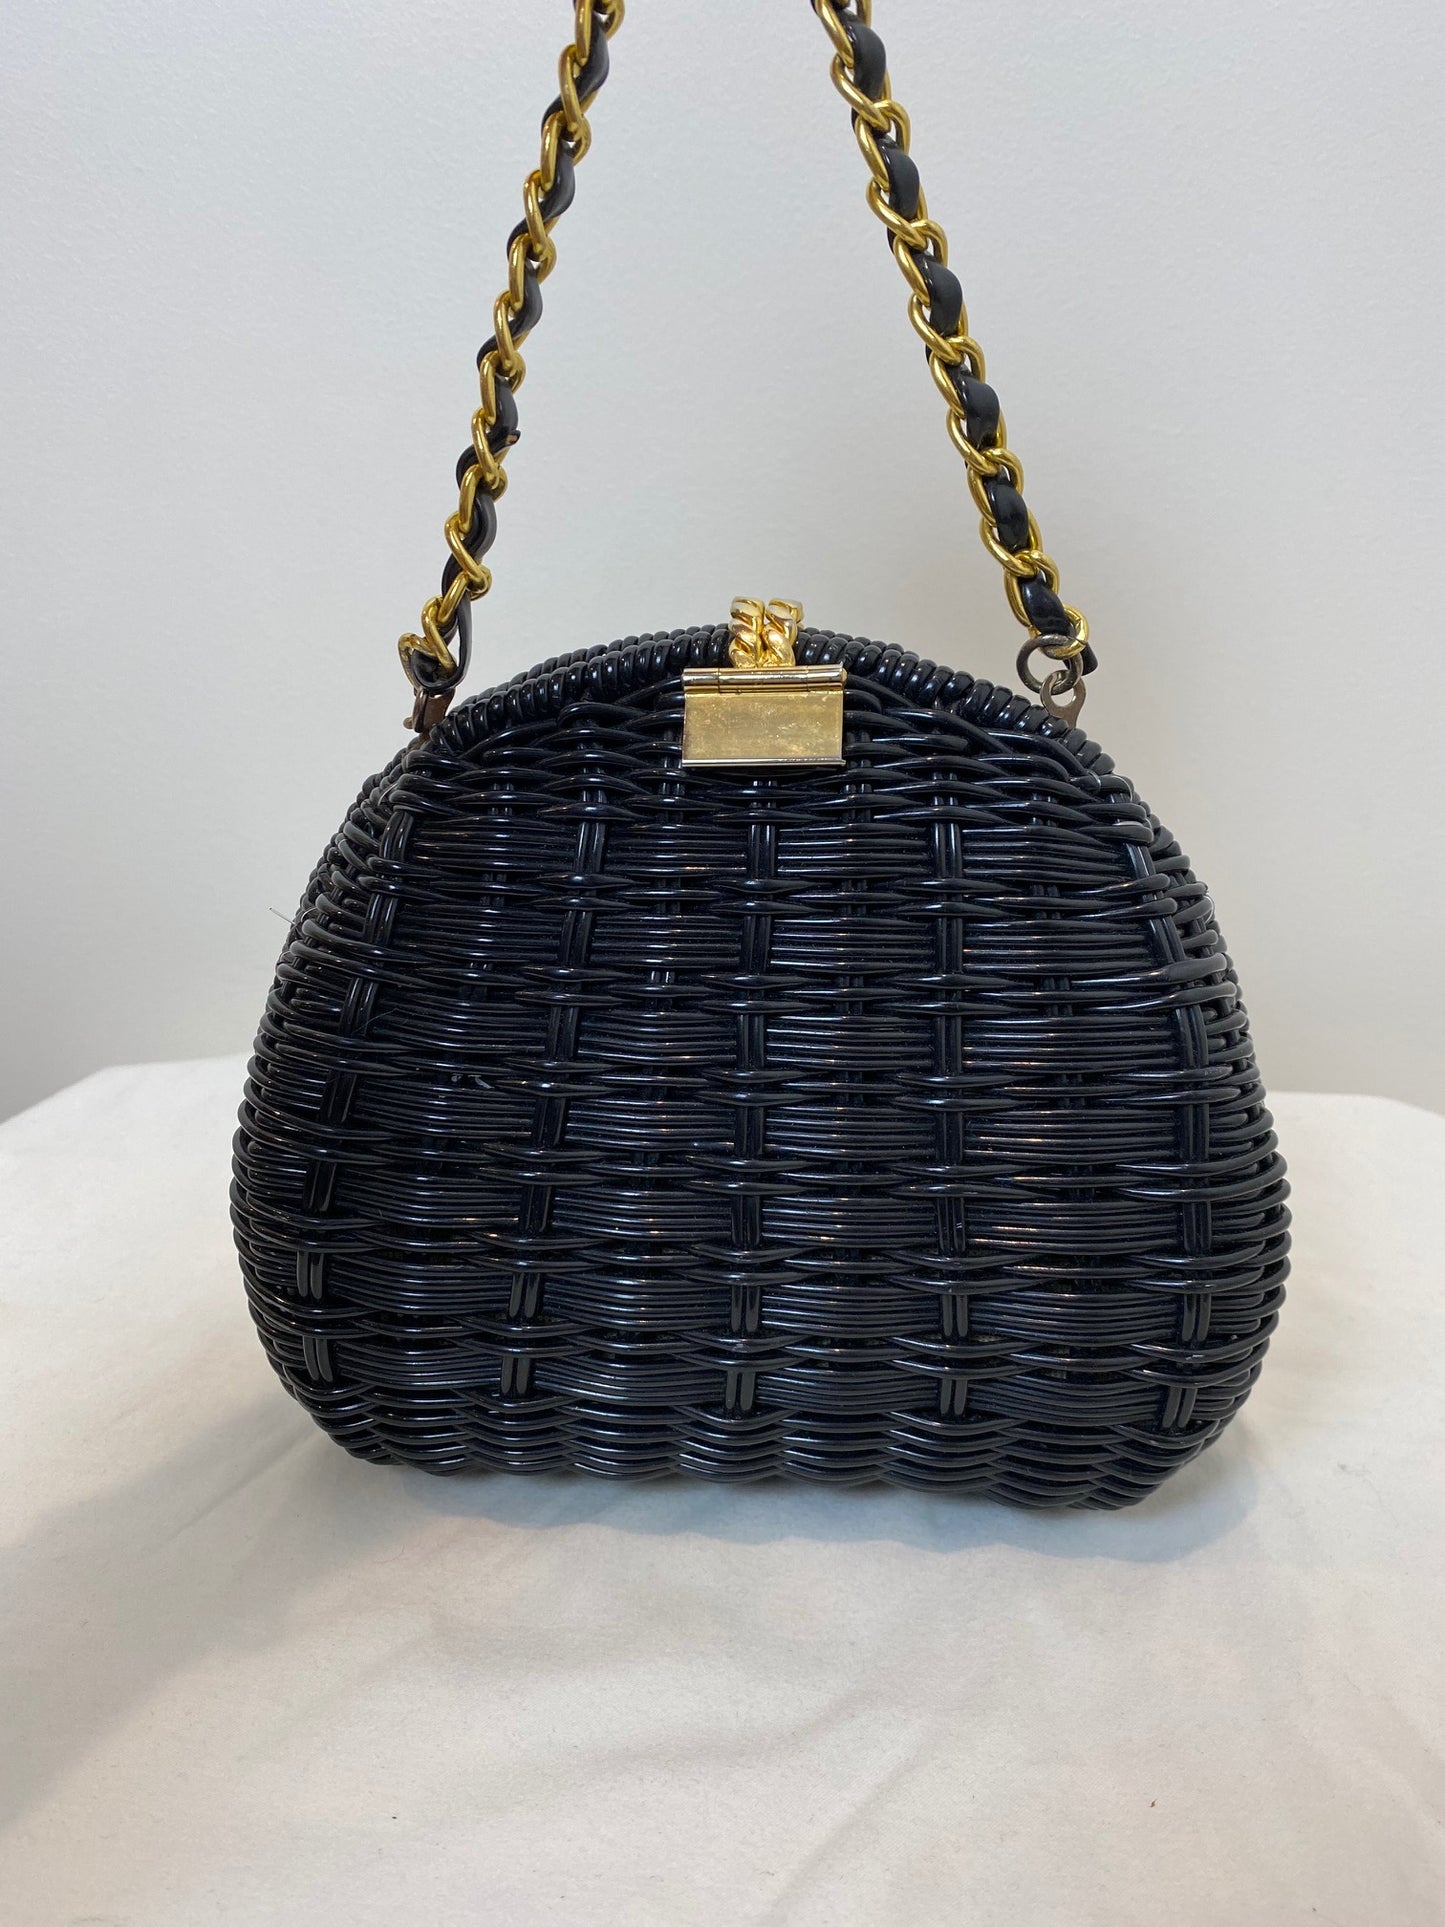 Black Wicker Purse with Gold Hardware